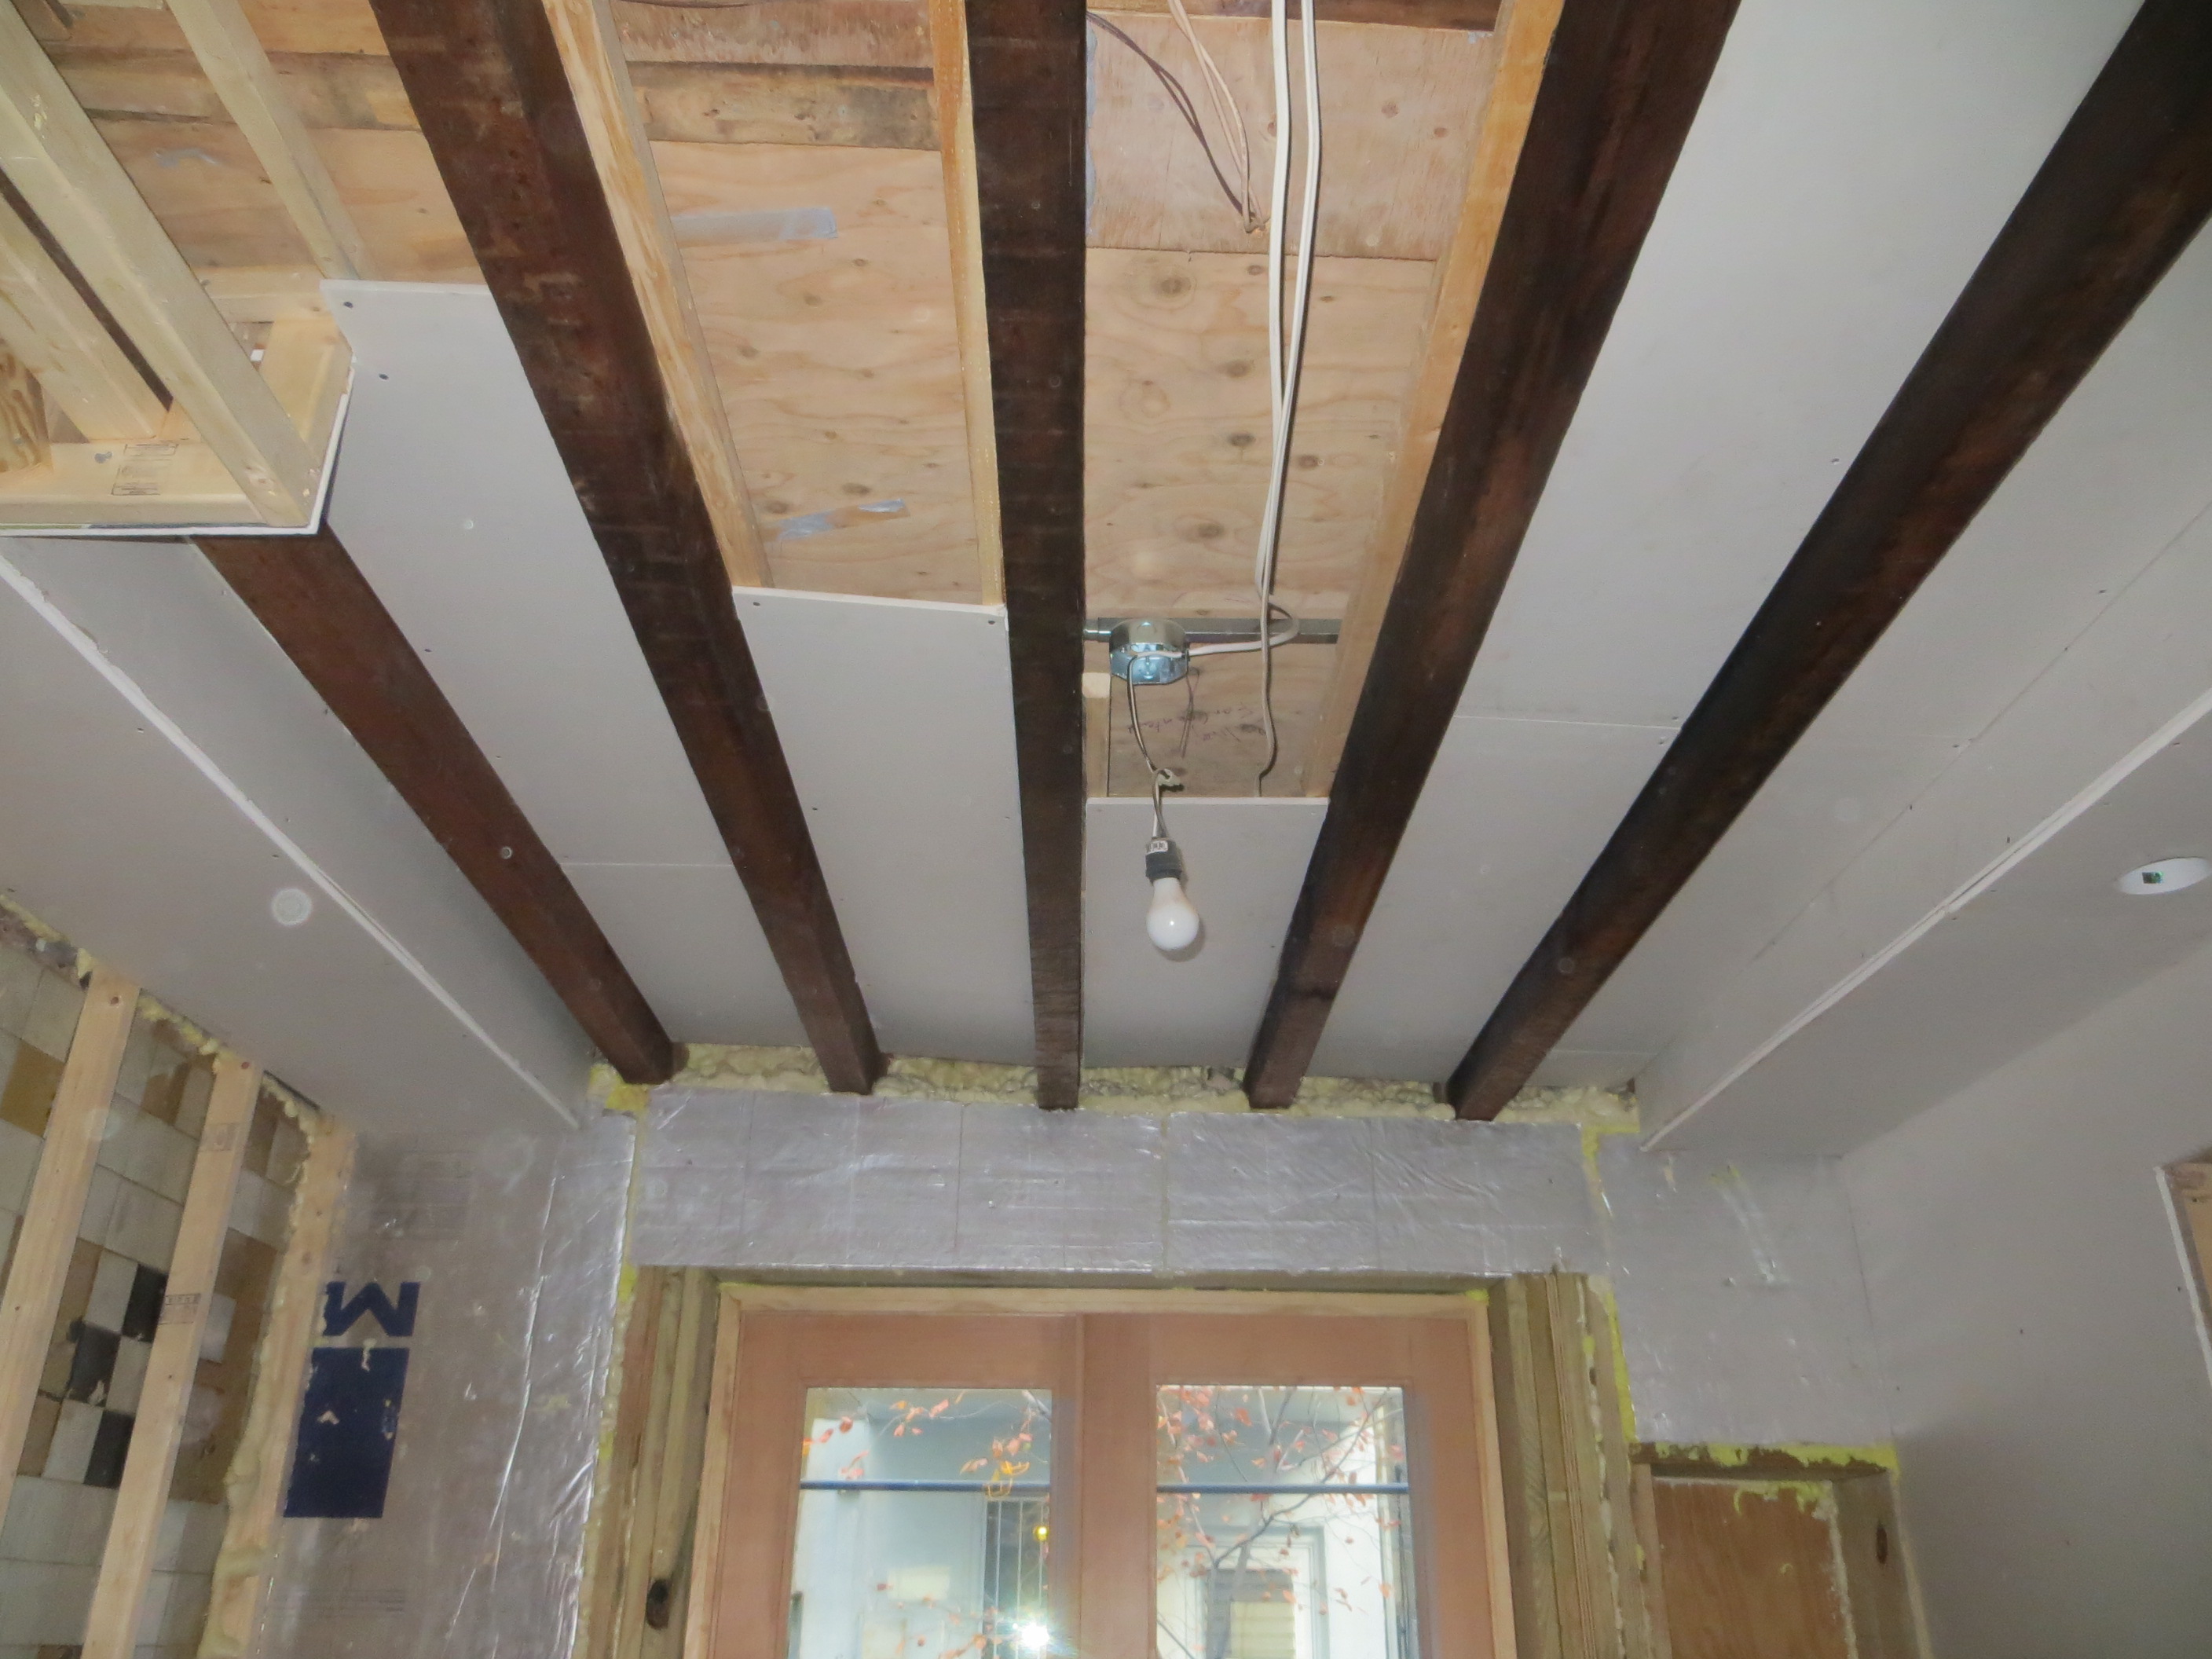 How to insulate vaulted ceiling